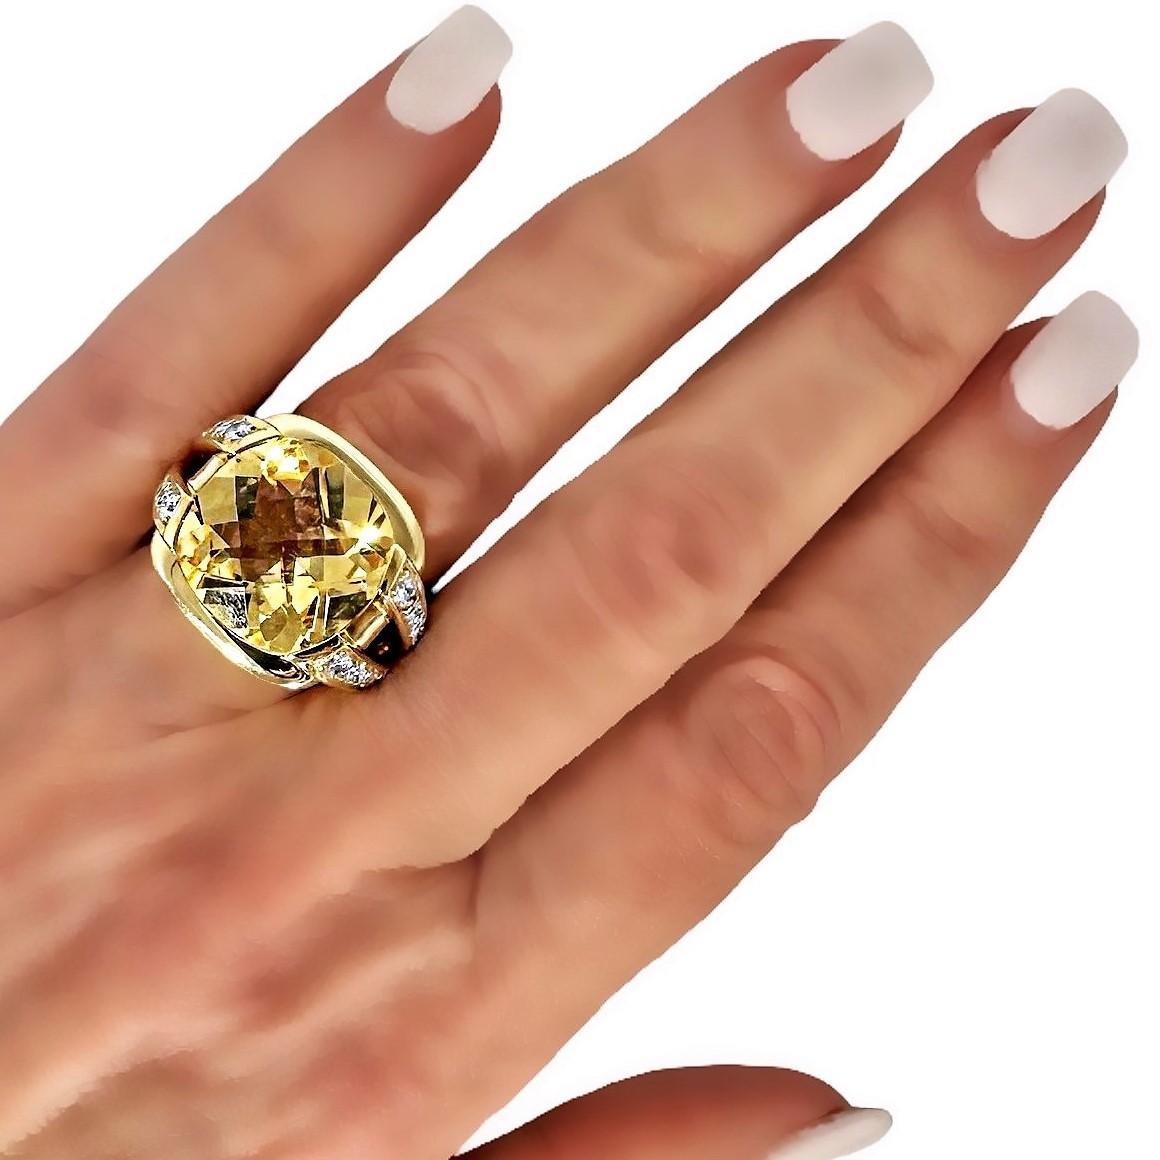 Very Dramatic Late-20th Century 18k Gold, Citrine and Diamond Fashion Ring For Sale 1